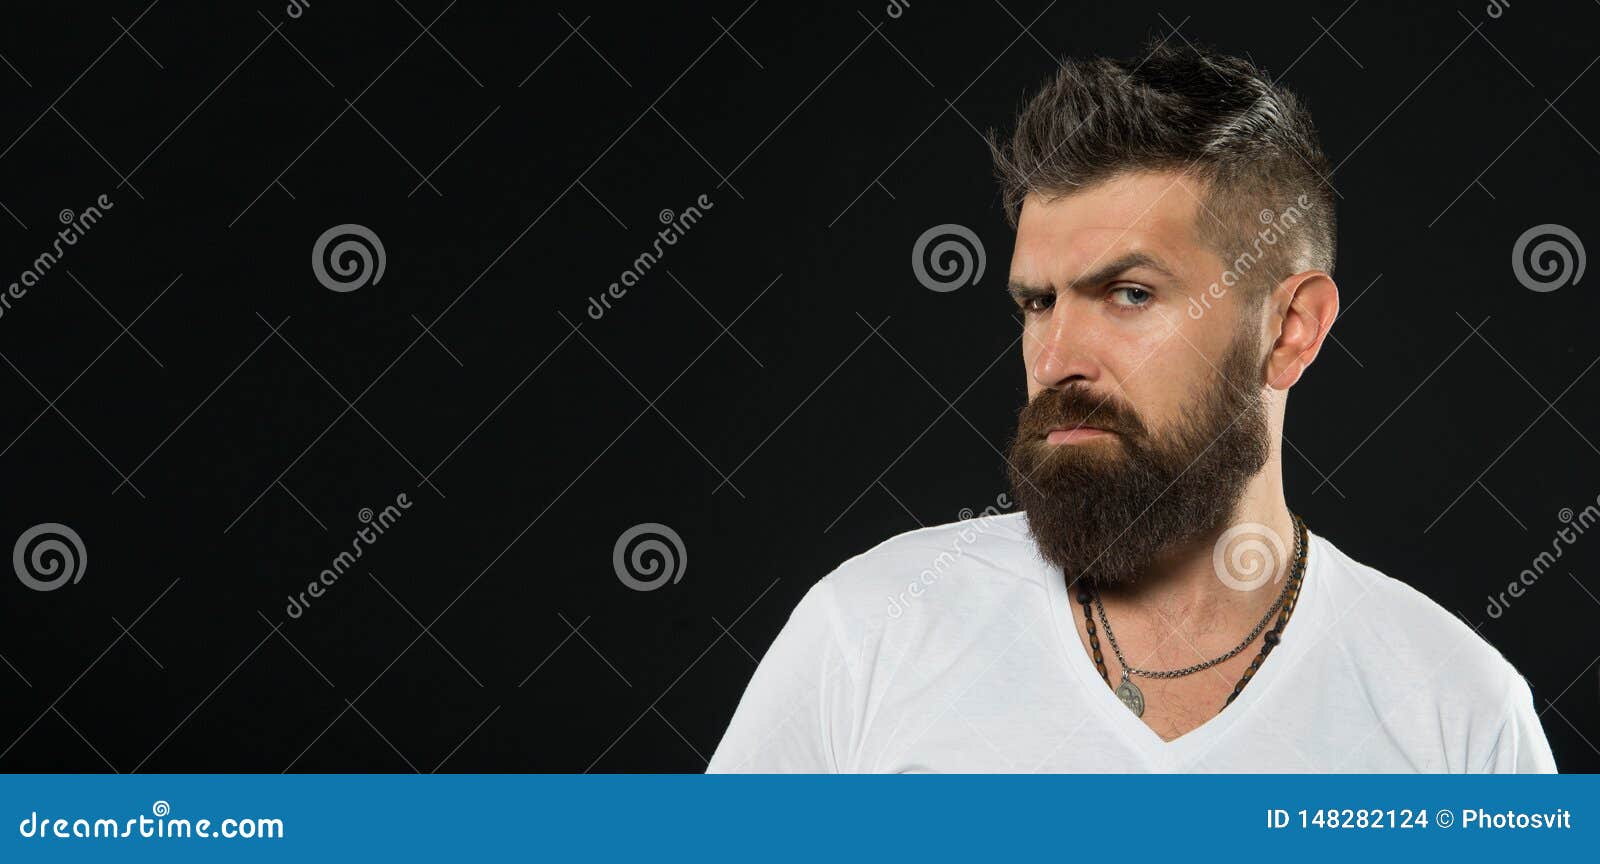 Barber Tips Maintain Beard. Styling and Trimming Beard Care. Bearded  Confident Hipster Stock Photo - Image of expert, confident: 148282124